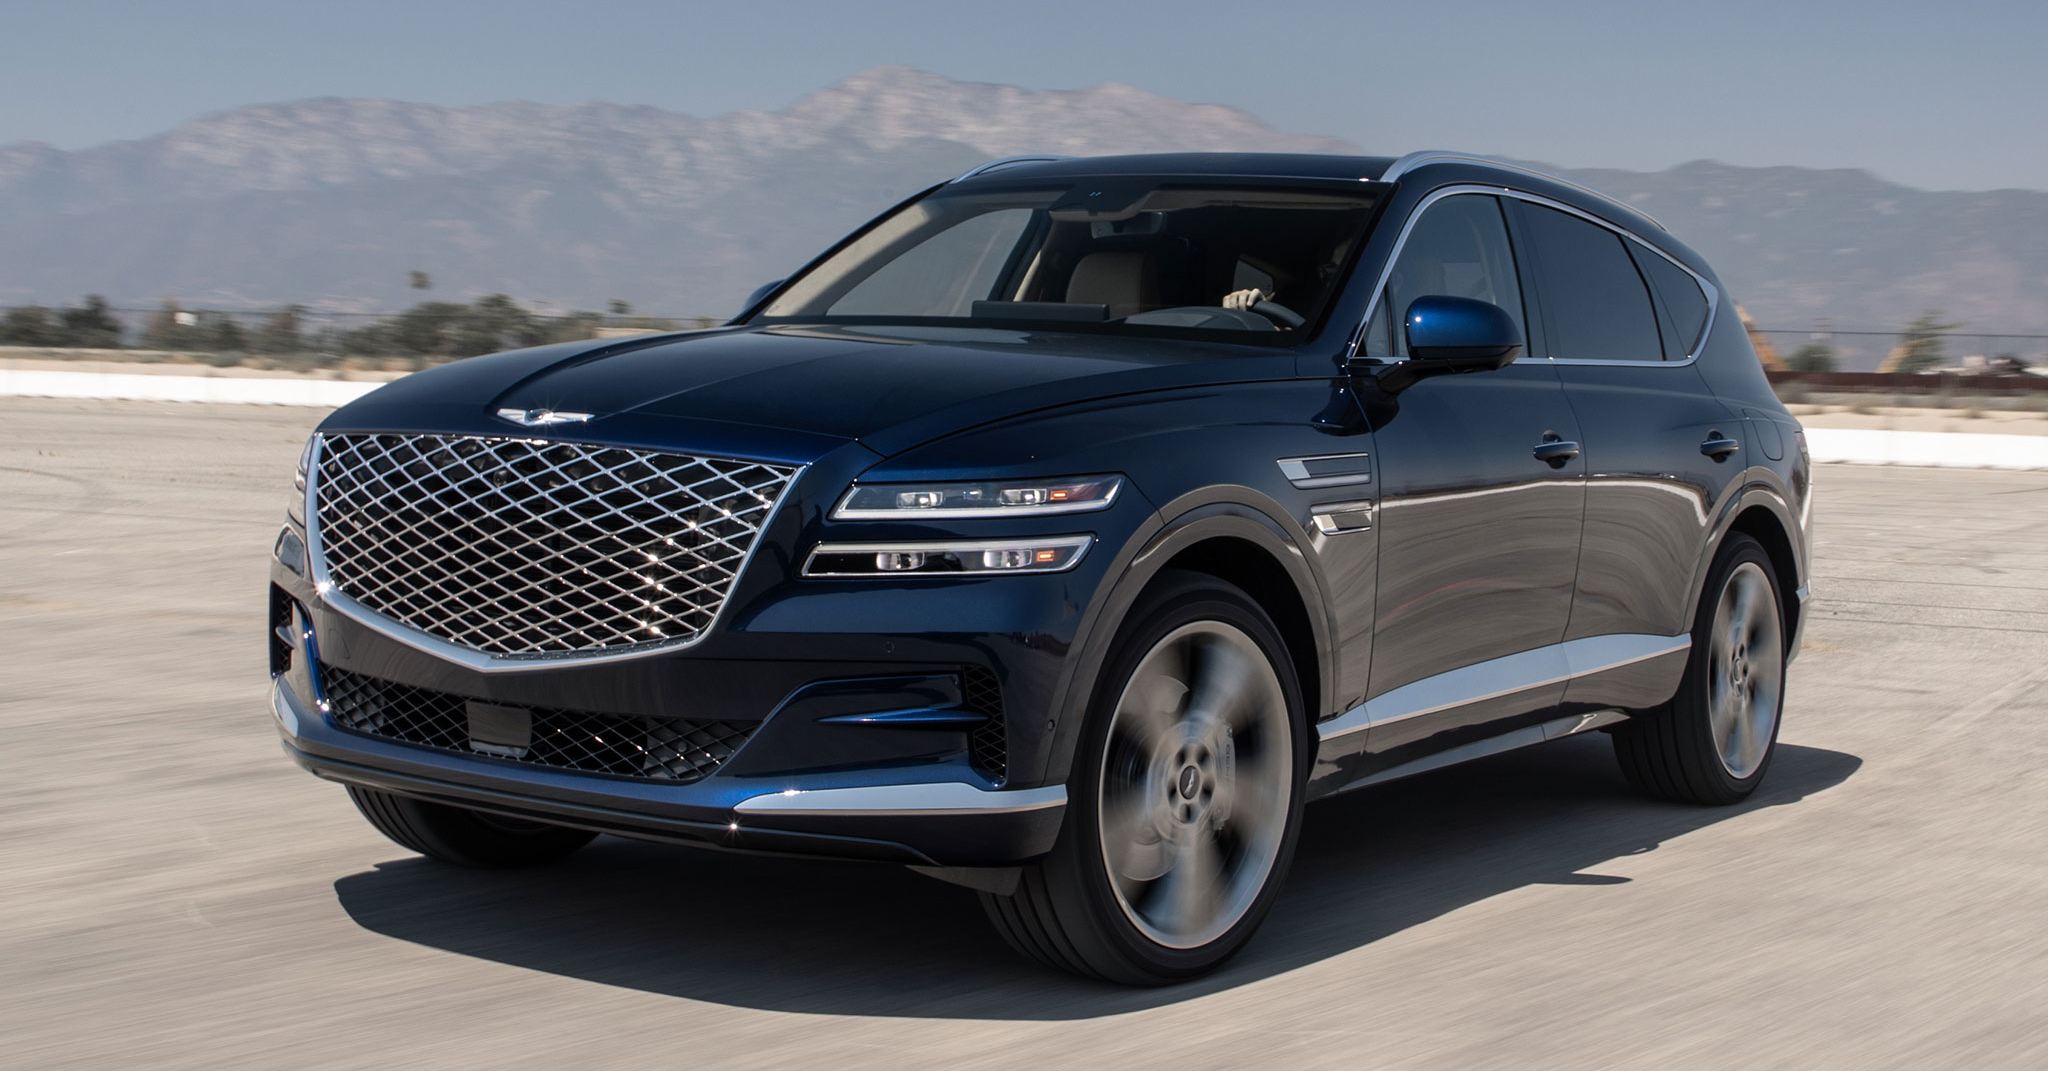 2021 Genesis GV80: A New Luxury SUV Enters the Mix